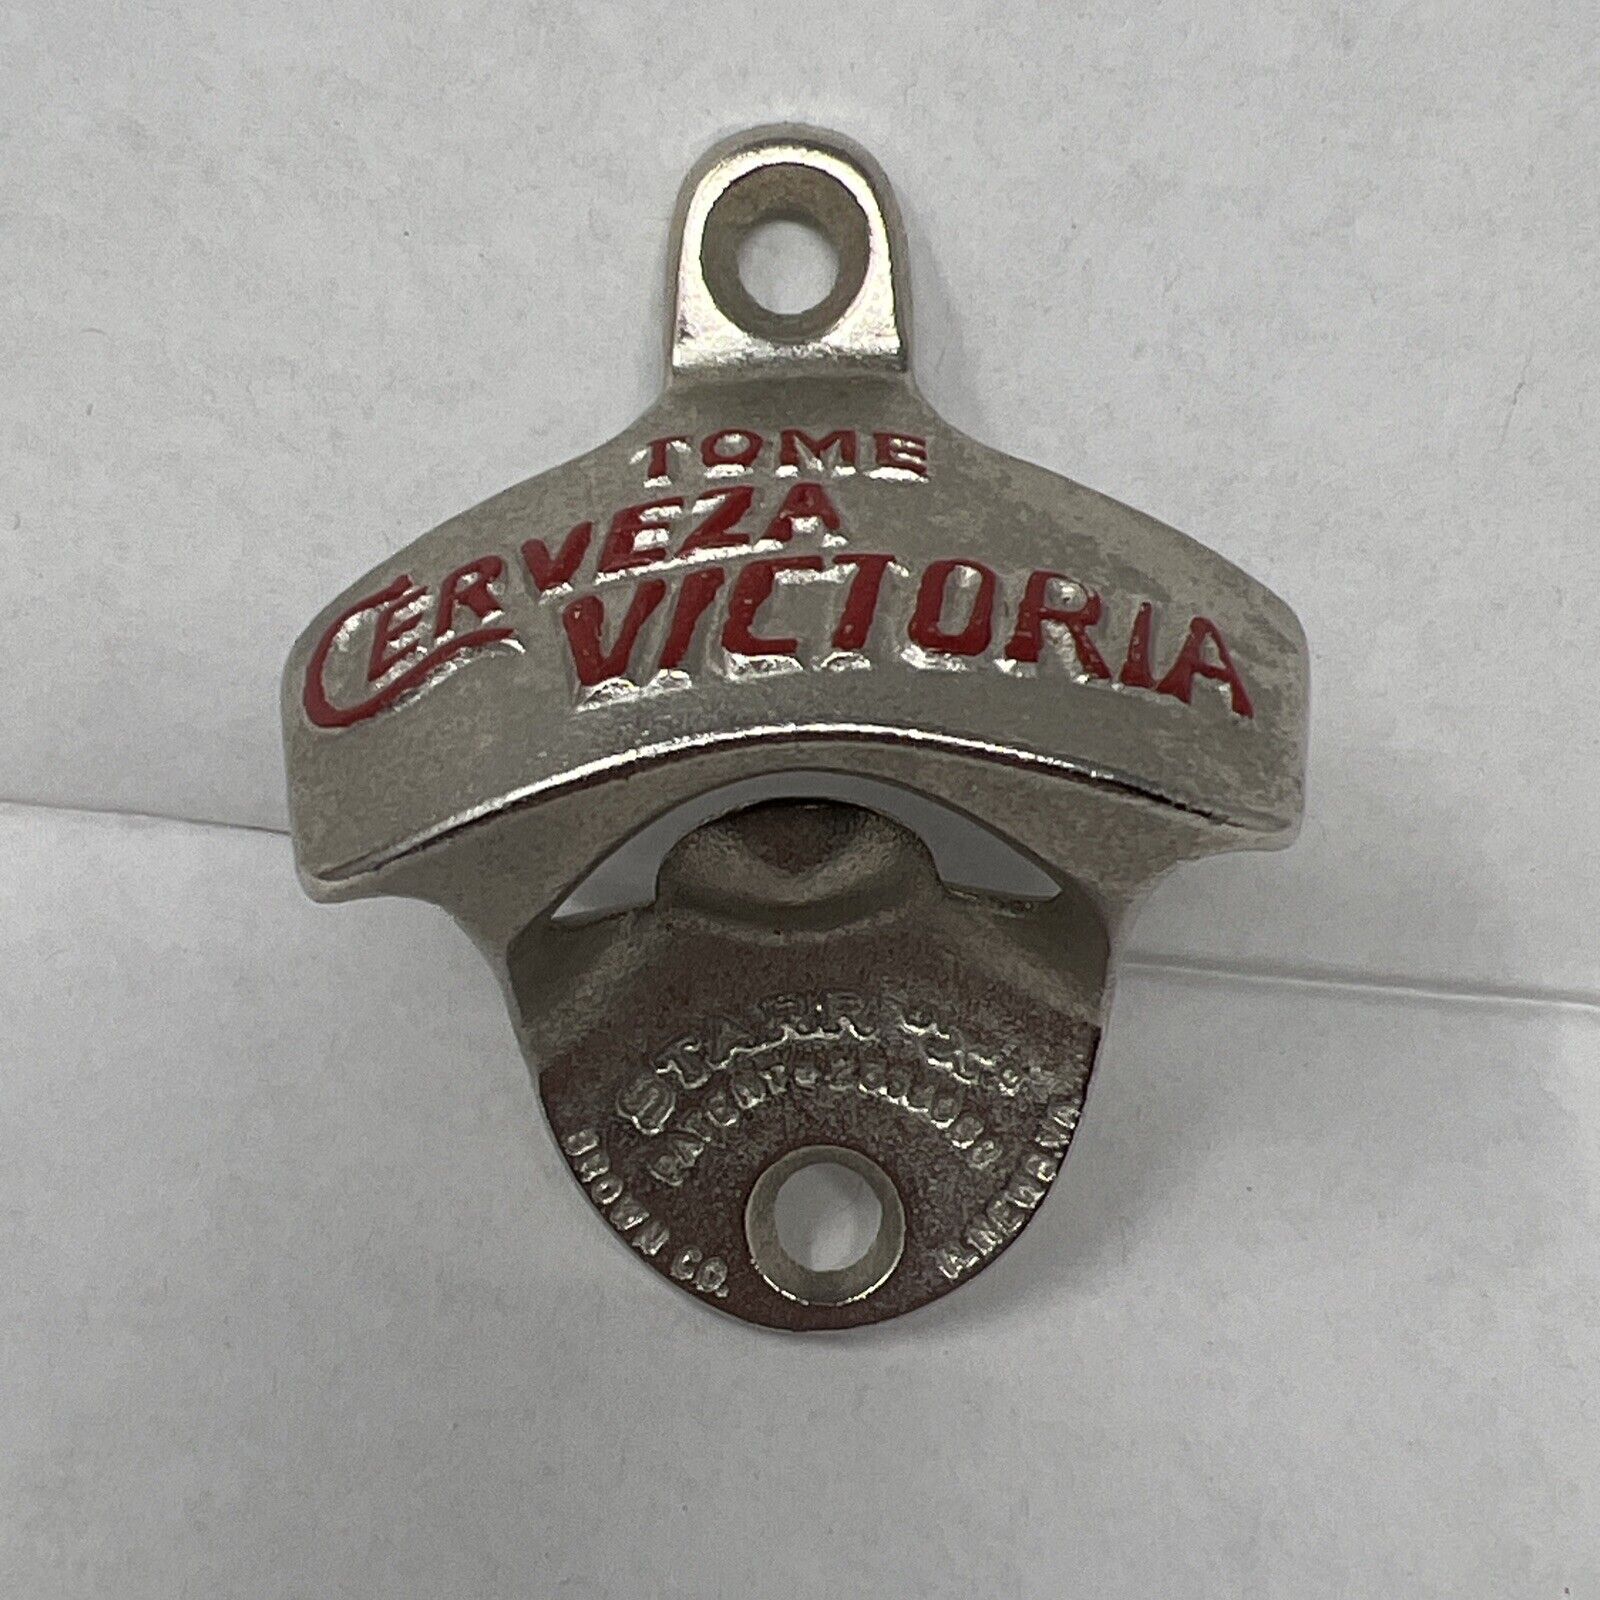 Vintage Wall Mounted TOME CERVEZA VICTORIA Bottle Opener - Made In W. Germany